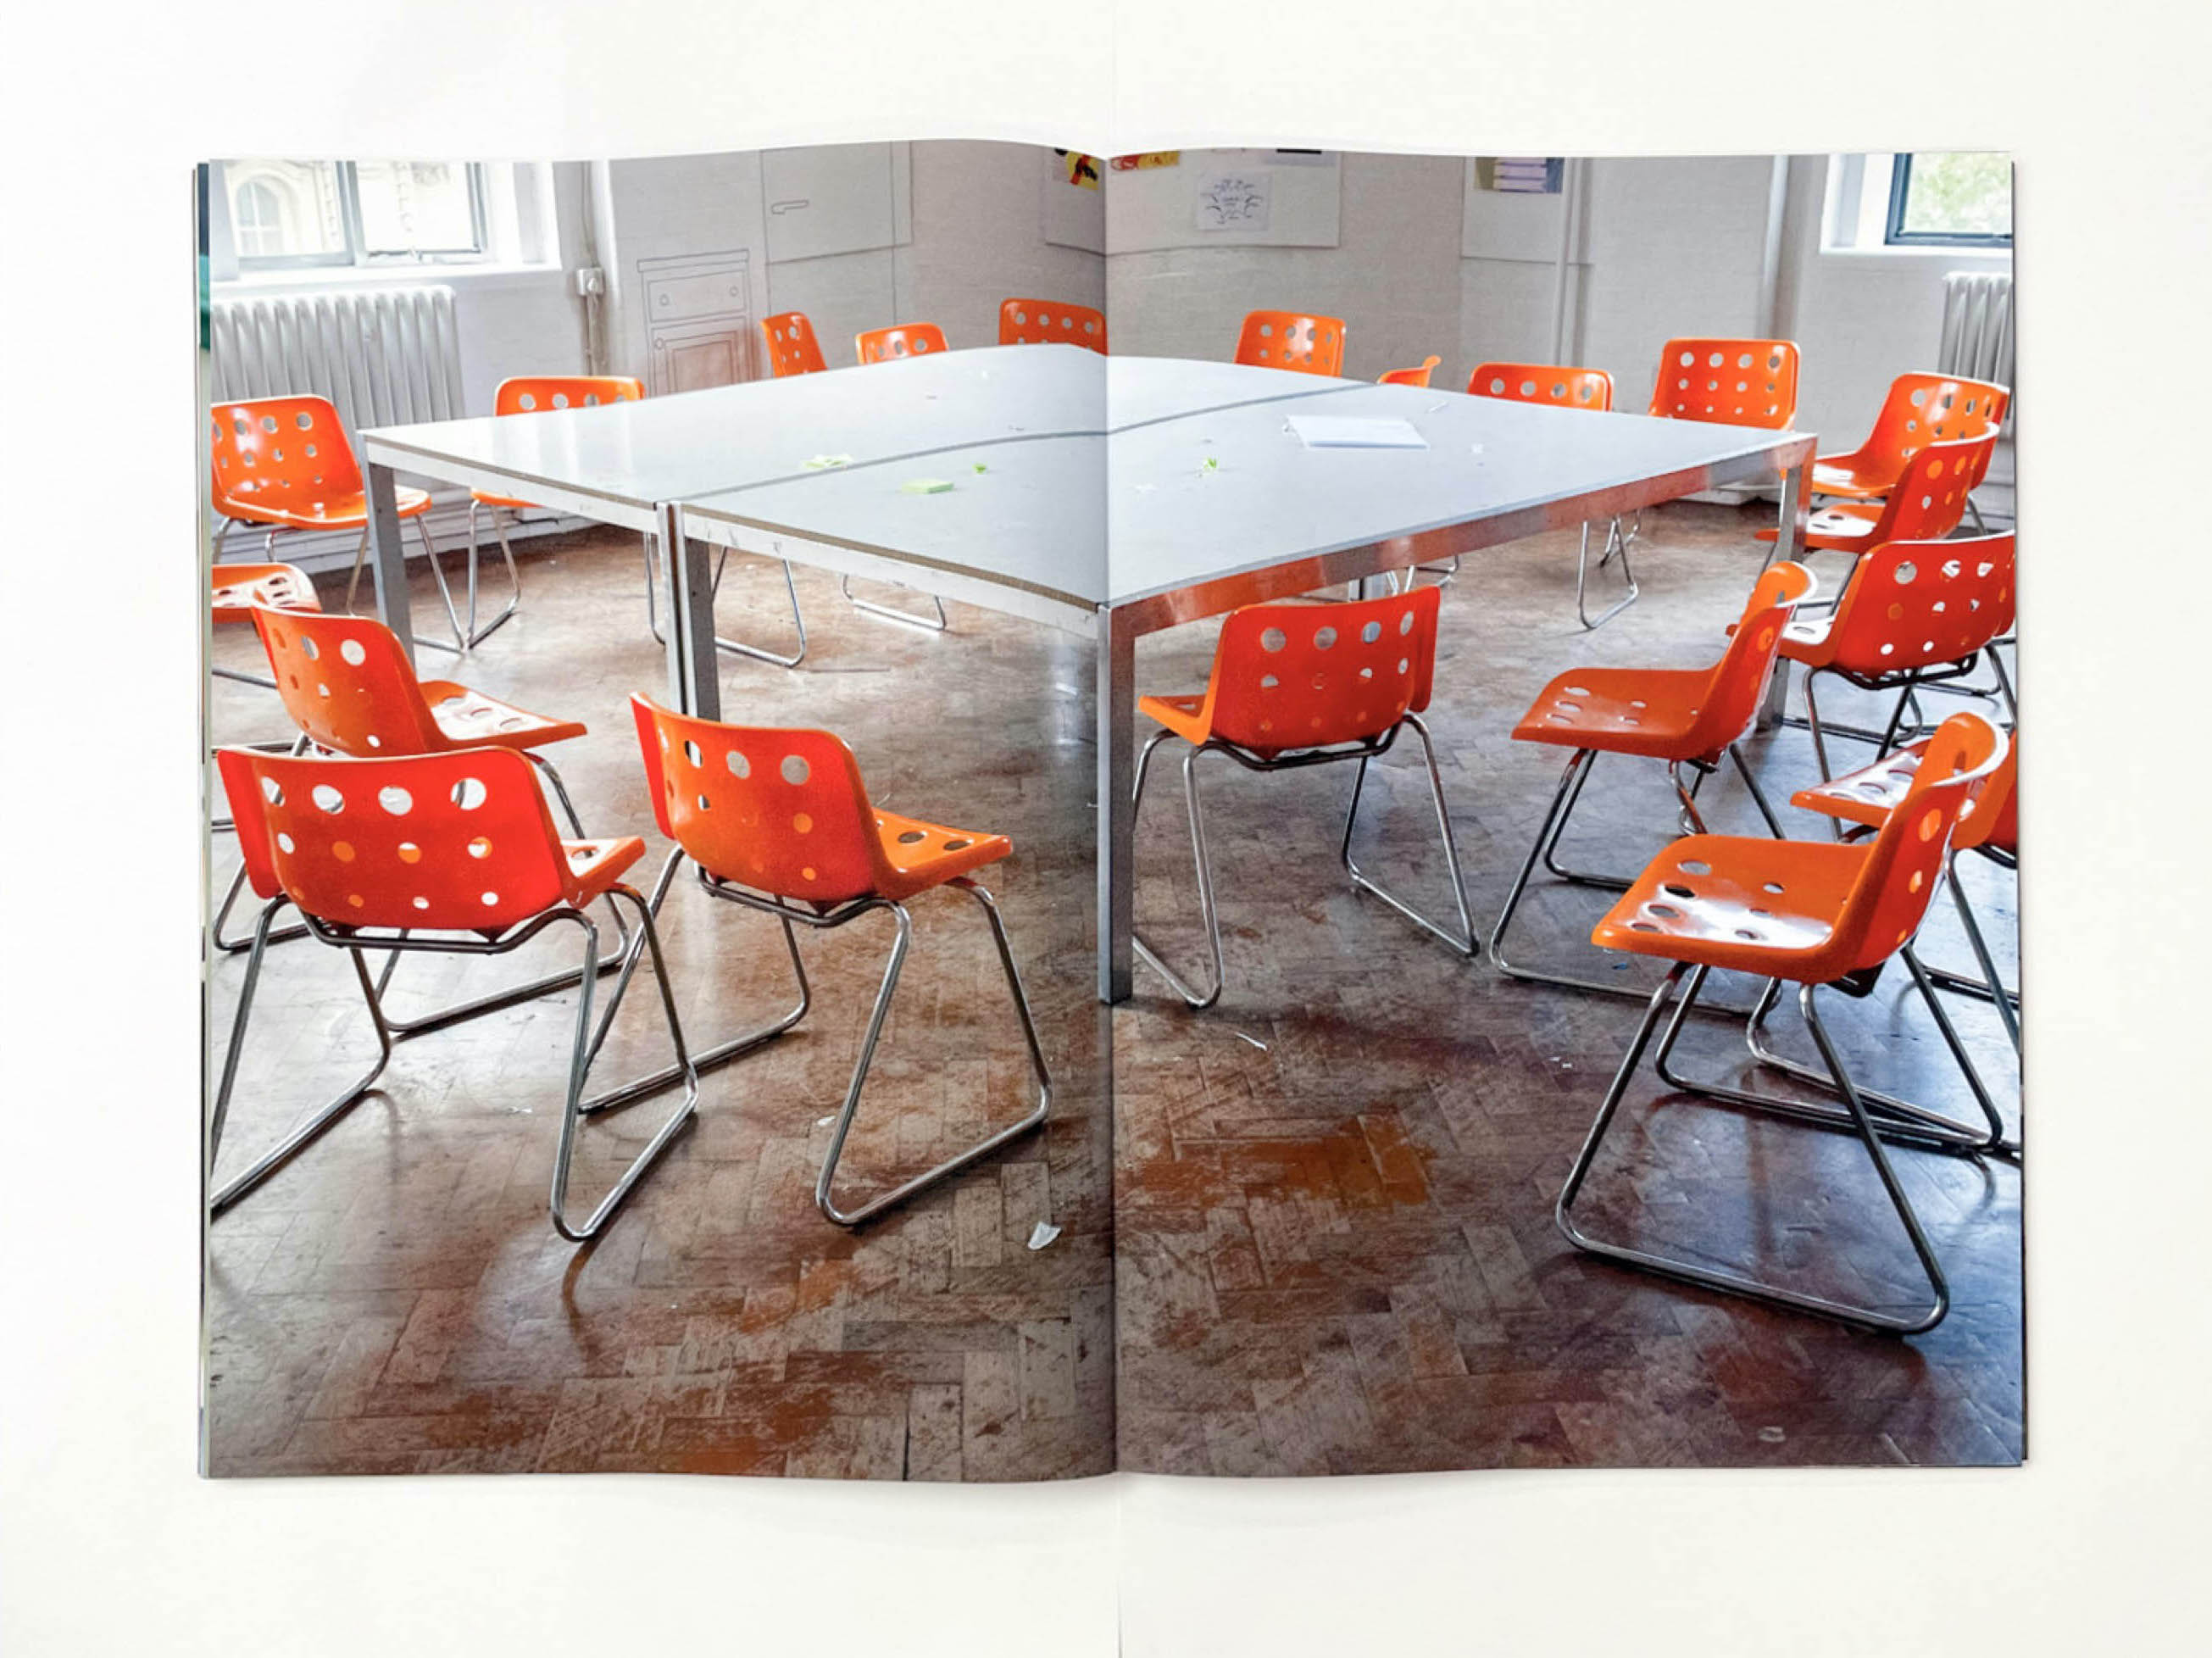 in a large room with a parquet floor many orange plastic chairs surround a large table